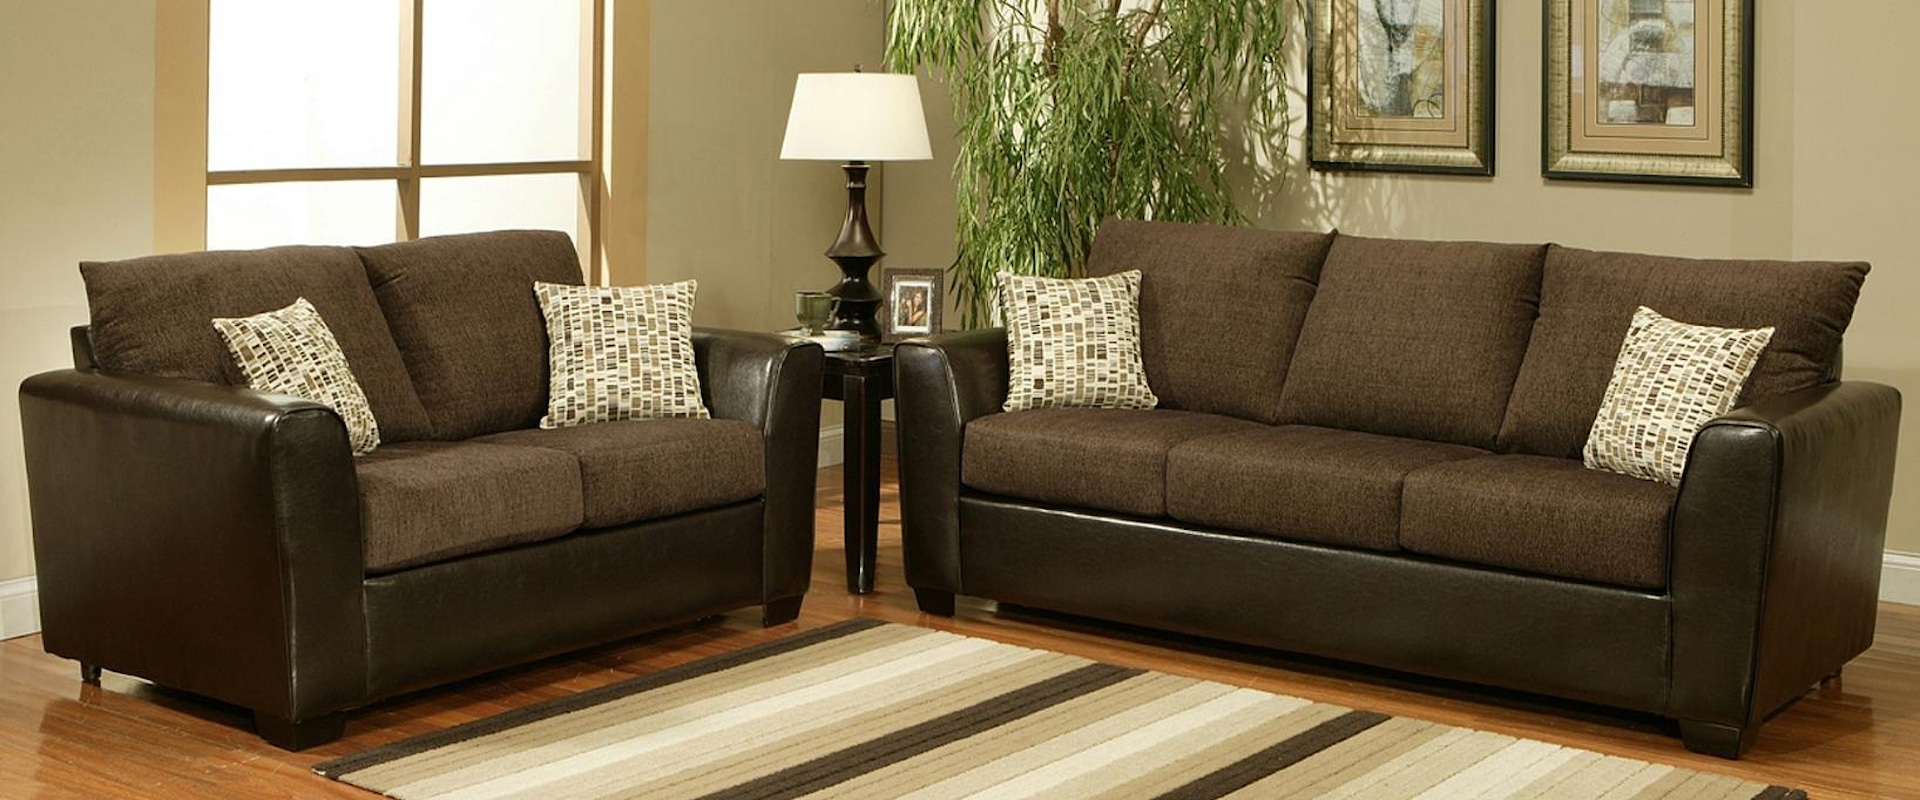 2 Piece Loveseat and Queen Sleeper Sofa Group